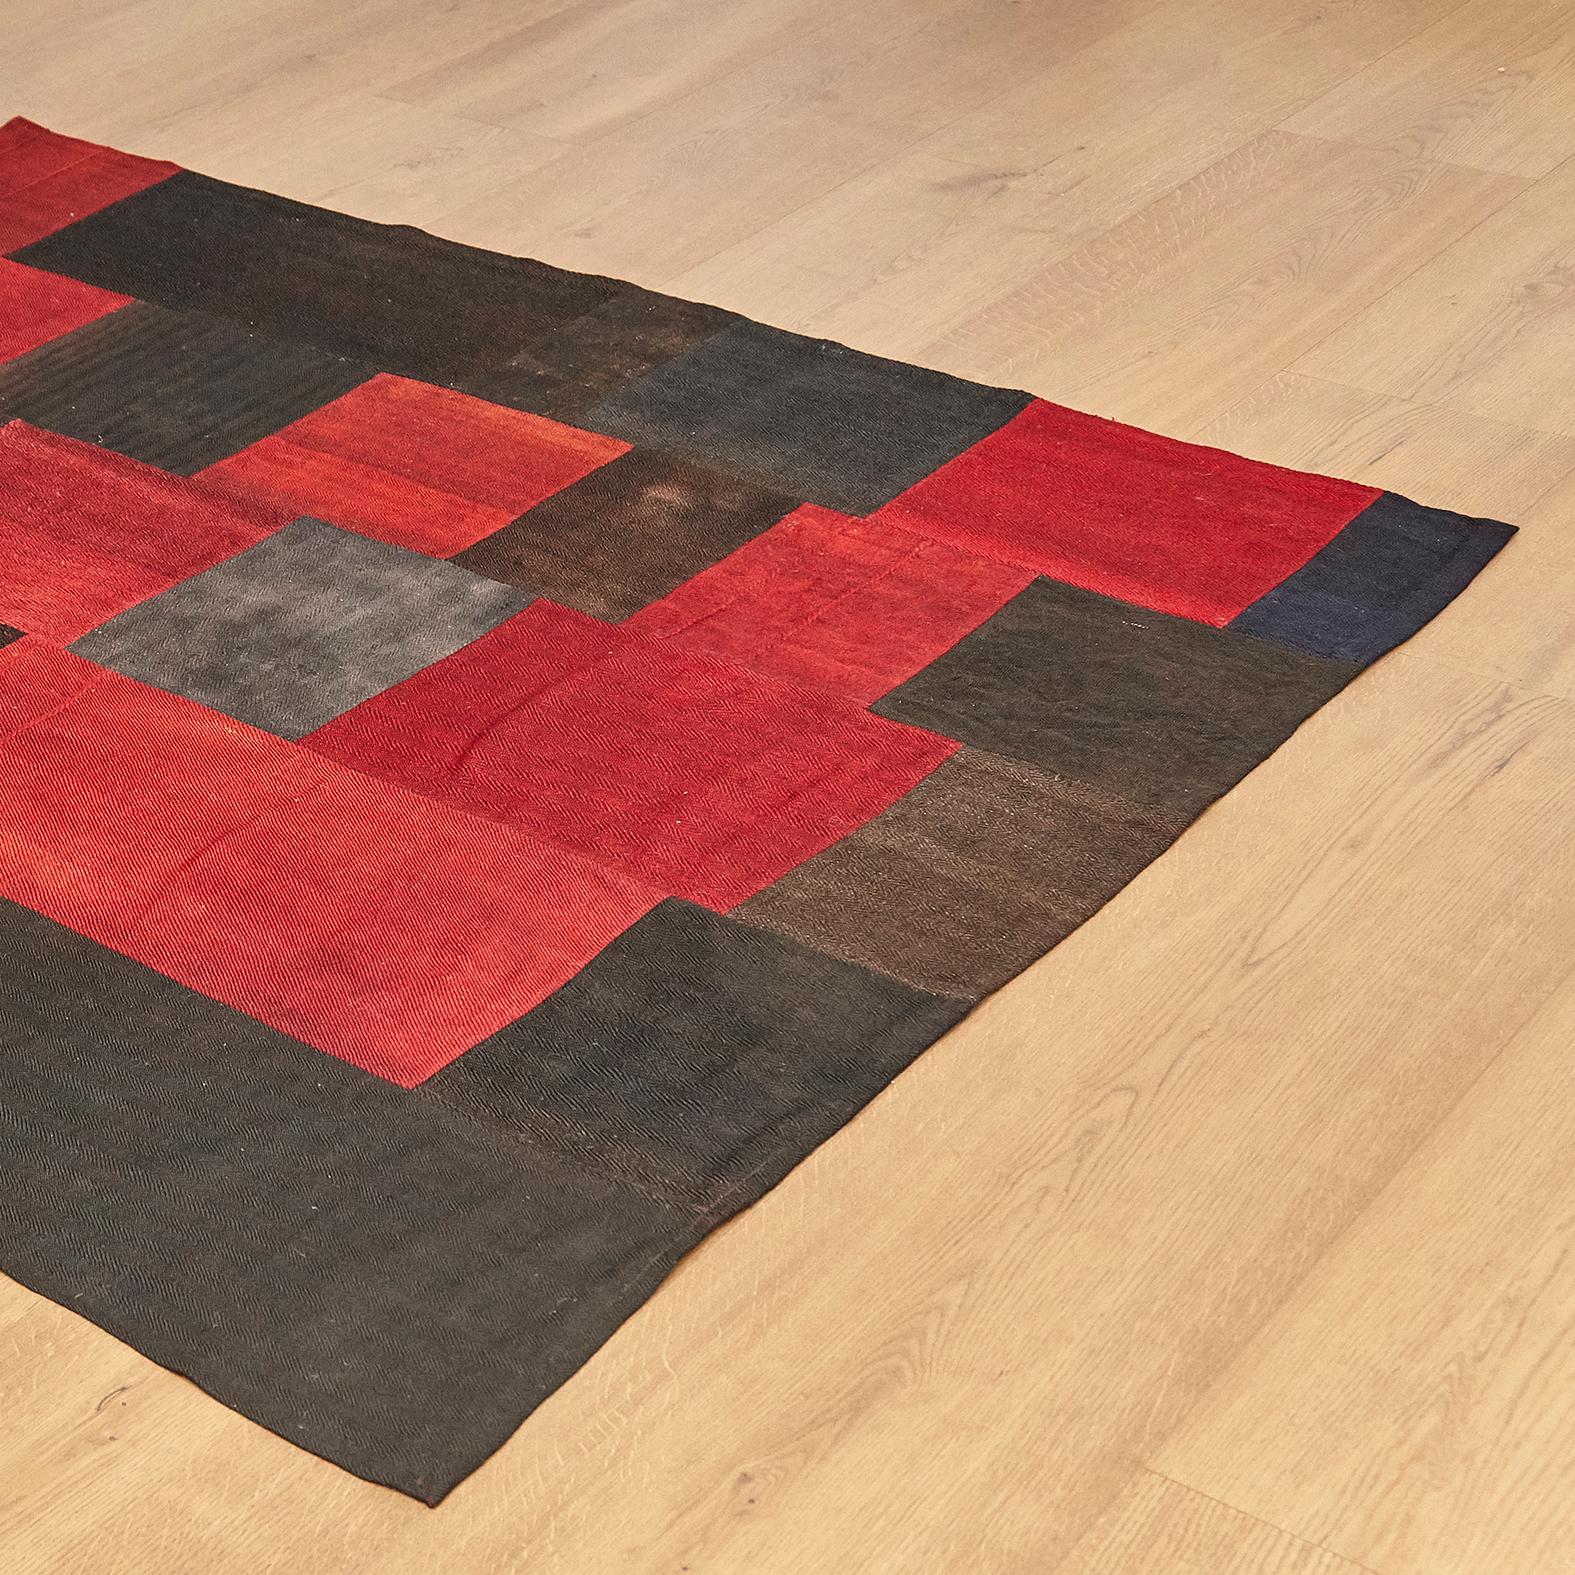 Rug antique Dizmeck Kilim from Turkey

Composition with vintage wool fabrics from est turkey

Measures: 166 x 194.
 